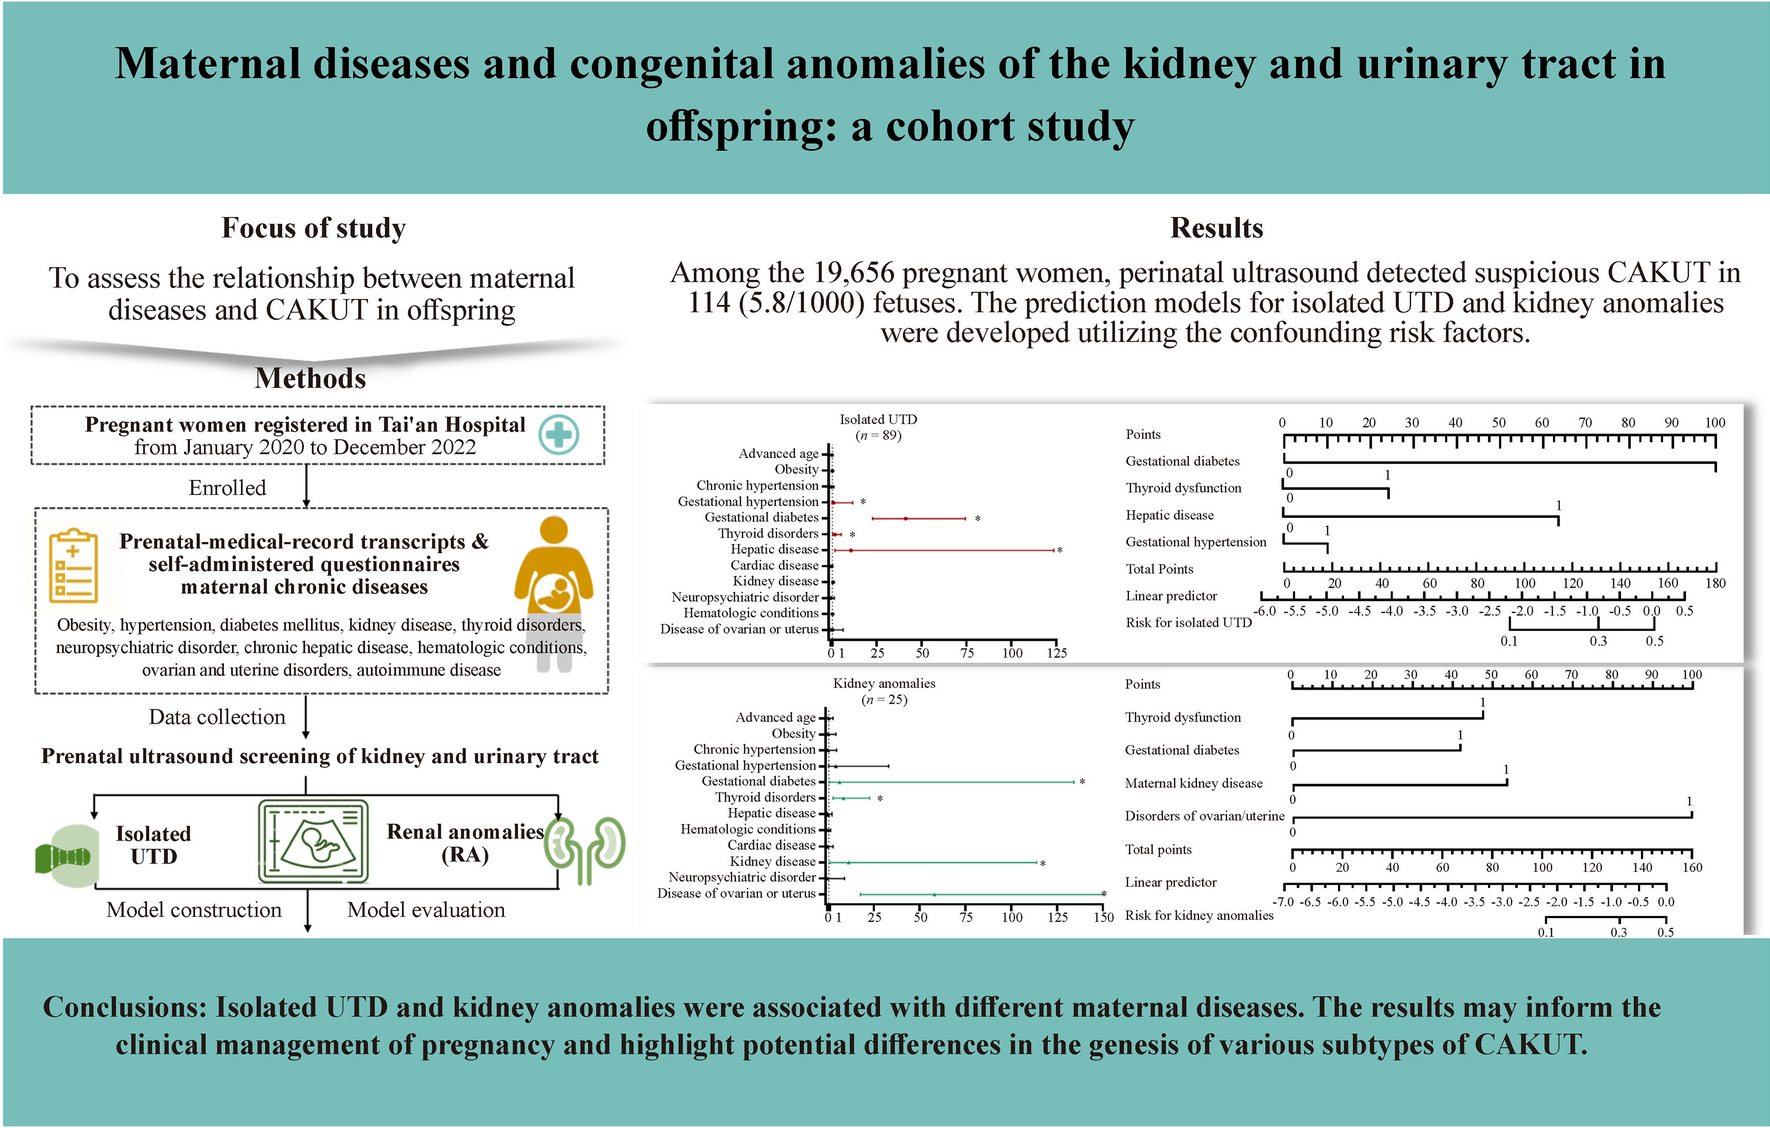 Maternal diseases and congenital anomalies of the kidney and urinary tract in offspring: a cohort study